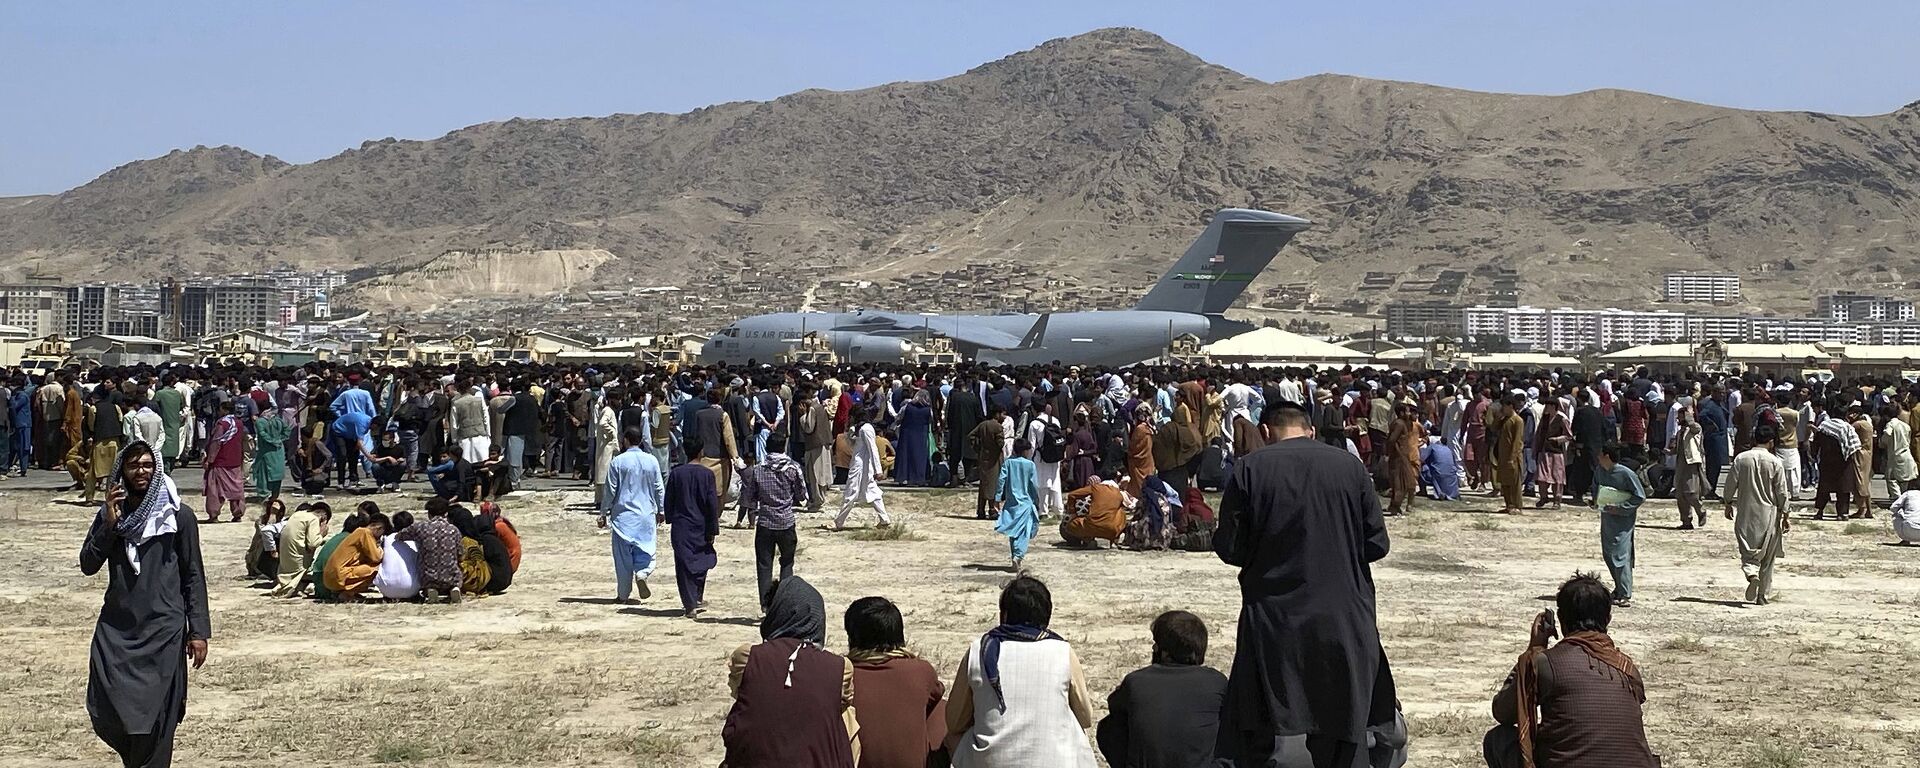 Hundreds of people gather near a U.S. Air Force C-17 transport plane at a perimeter at the international airport in Kabul, Afghanistan, Monday, Aug. 16, 2021. - Sputnik International, 1920, 09.12.2021